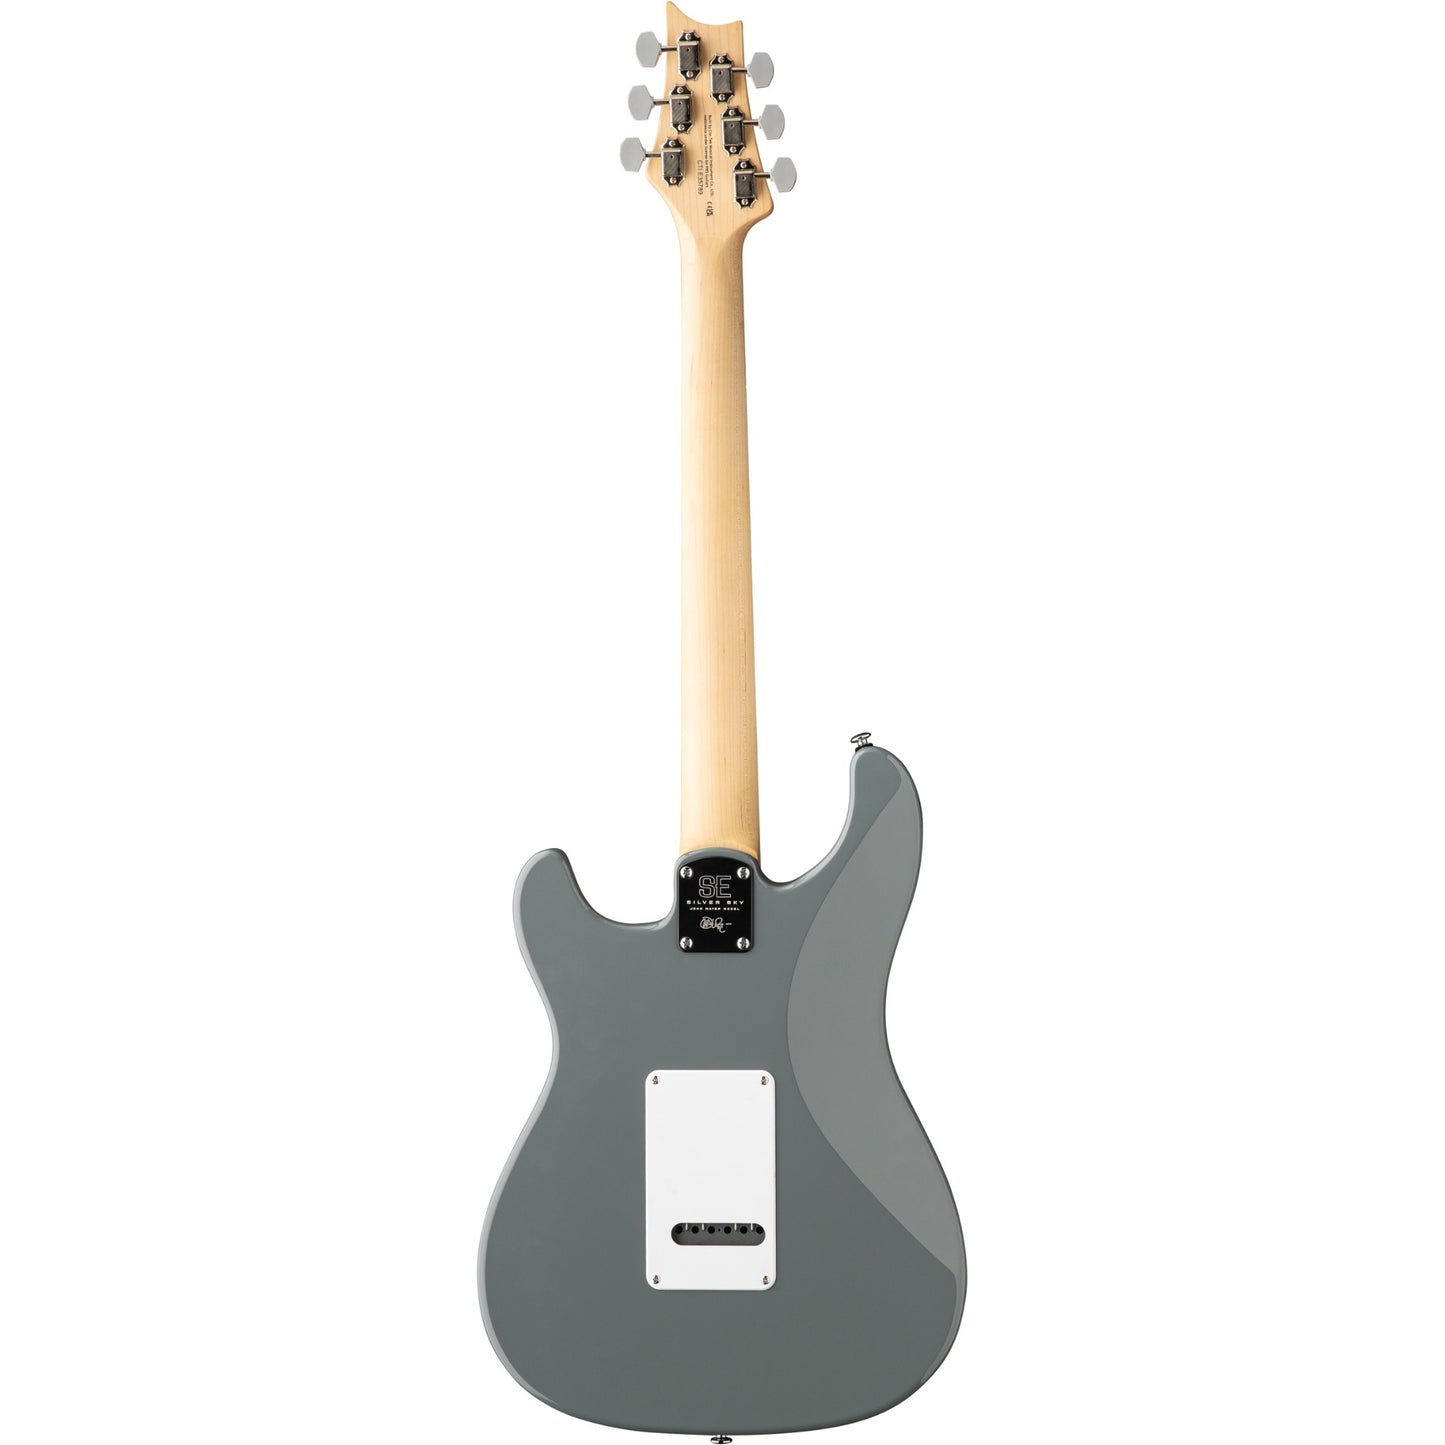 PRS SE Silver Sky Rosewood Fretboard Electric Guitar - Storm Gray